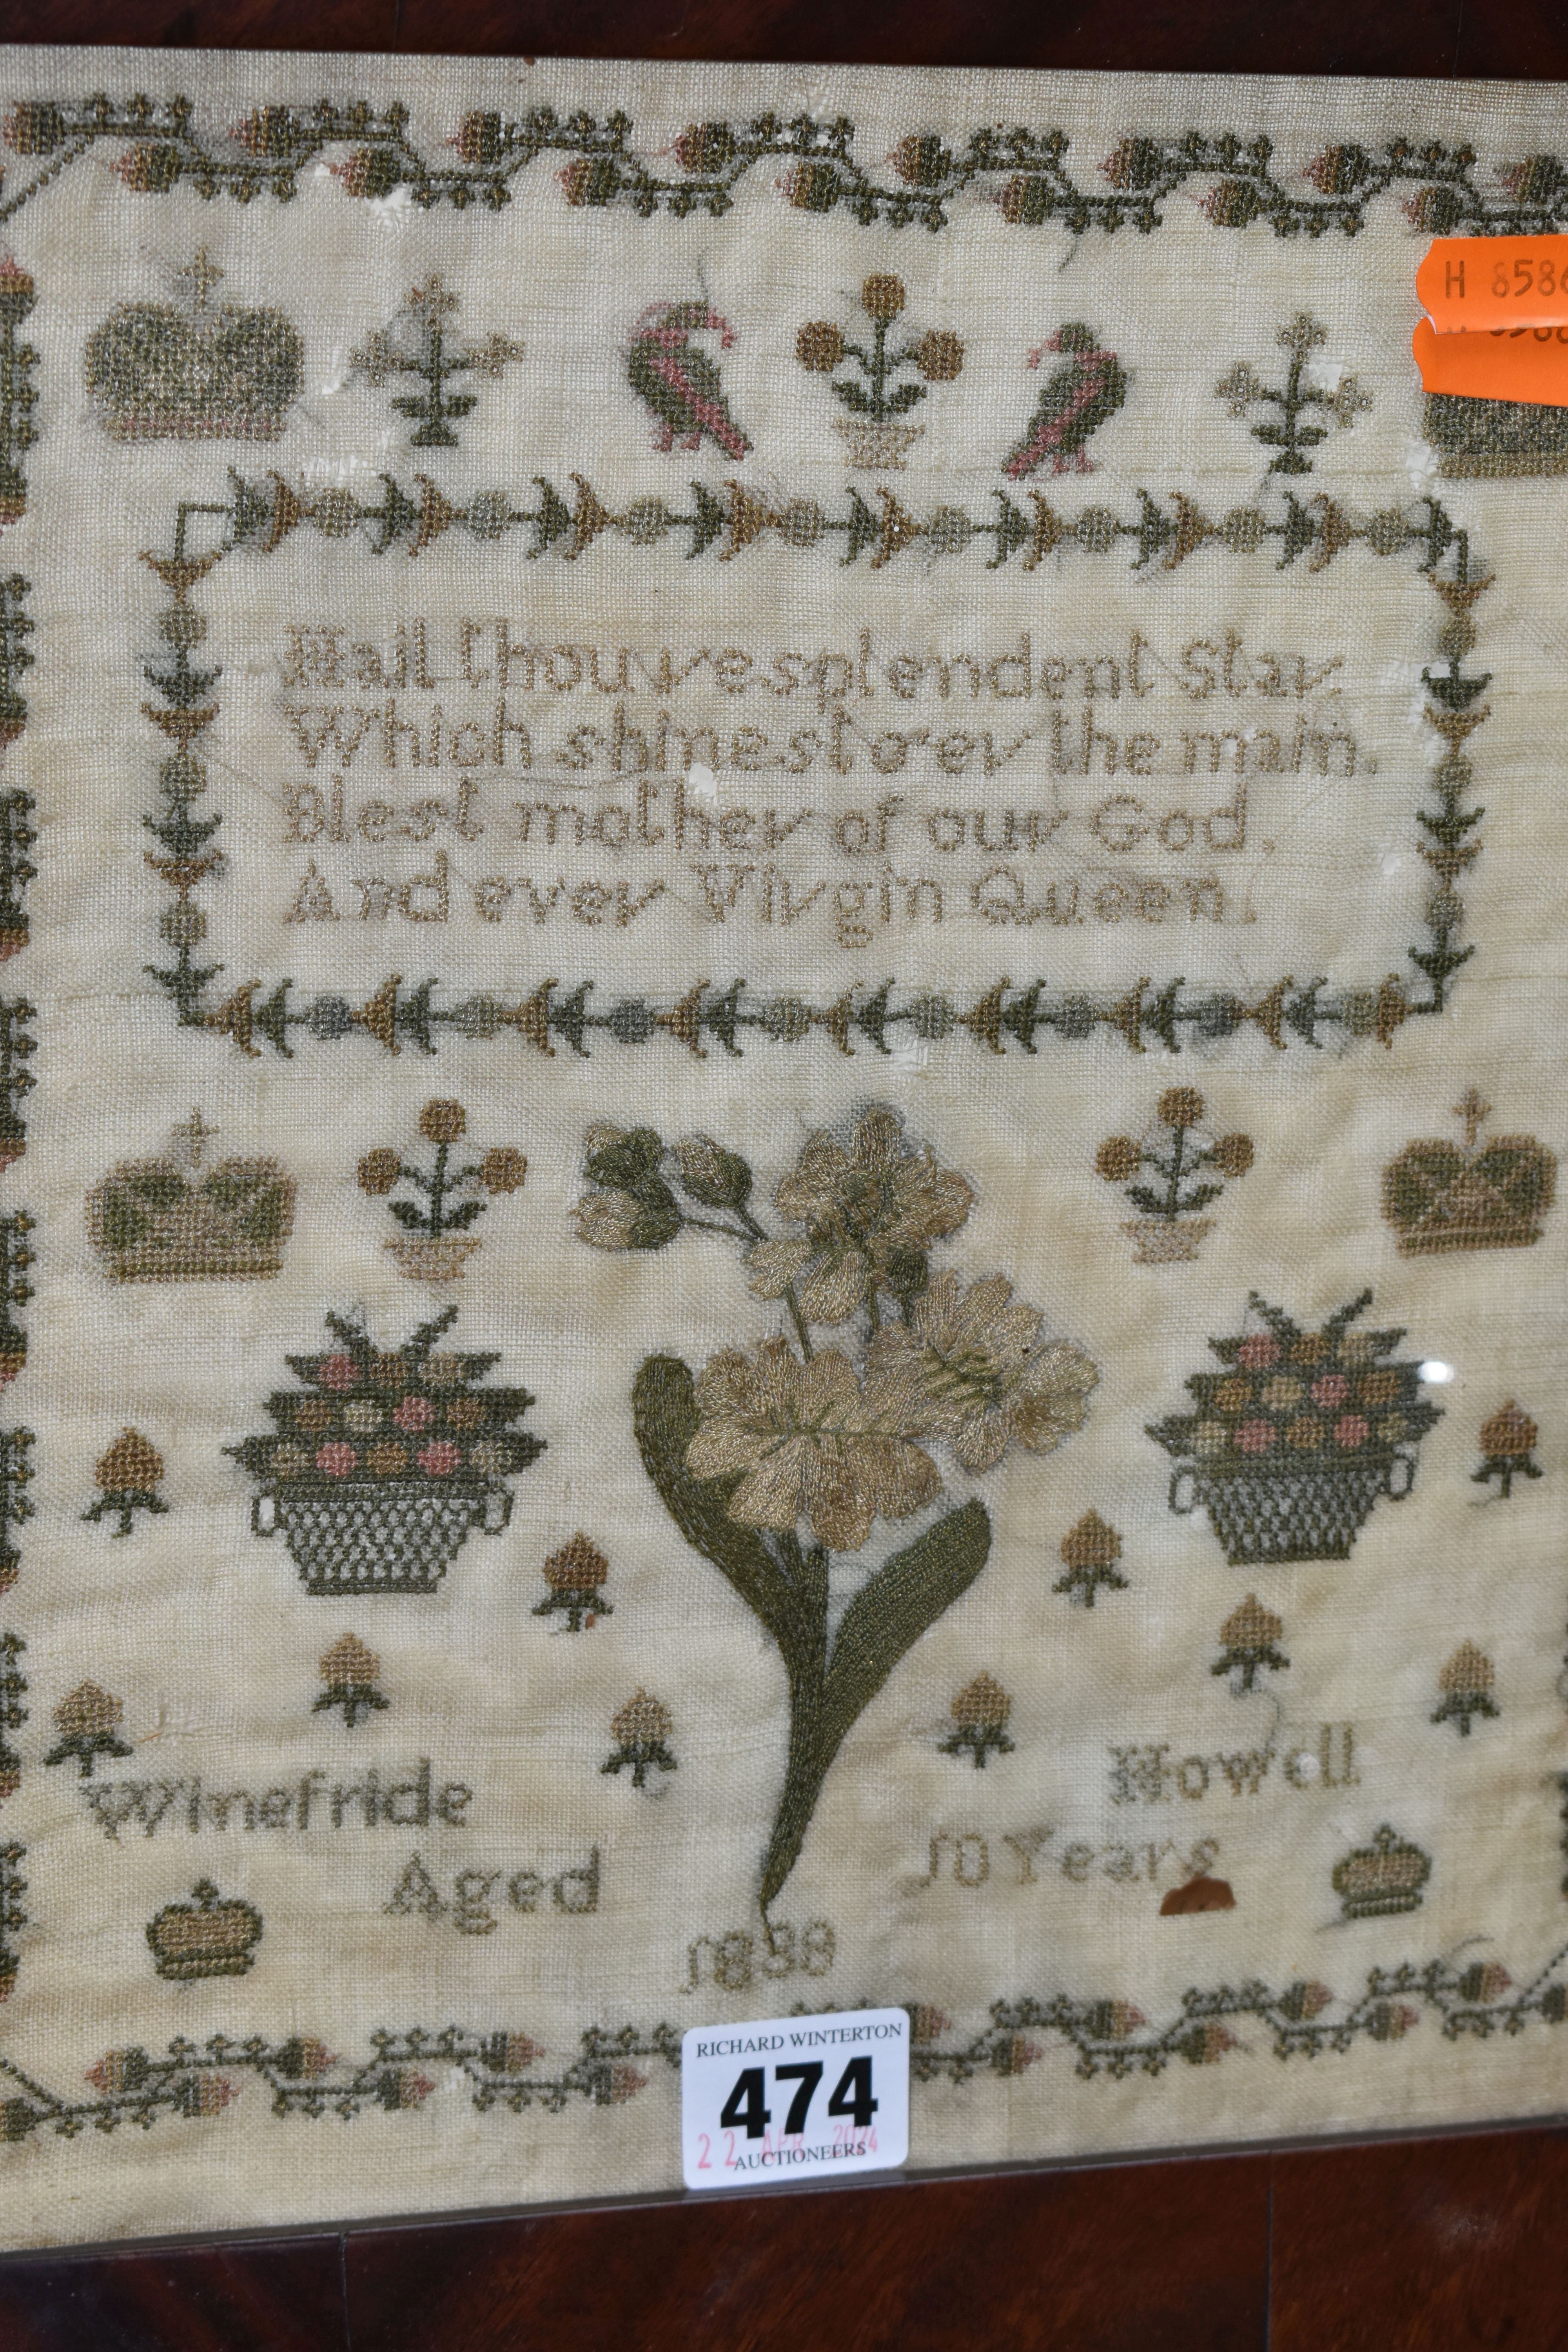 A QUANTITY OF PICTURES AND PRINTS ETC, to include a needlework sampler by Winefride Howell aged - Image 2 of 11